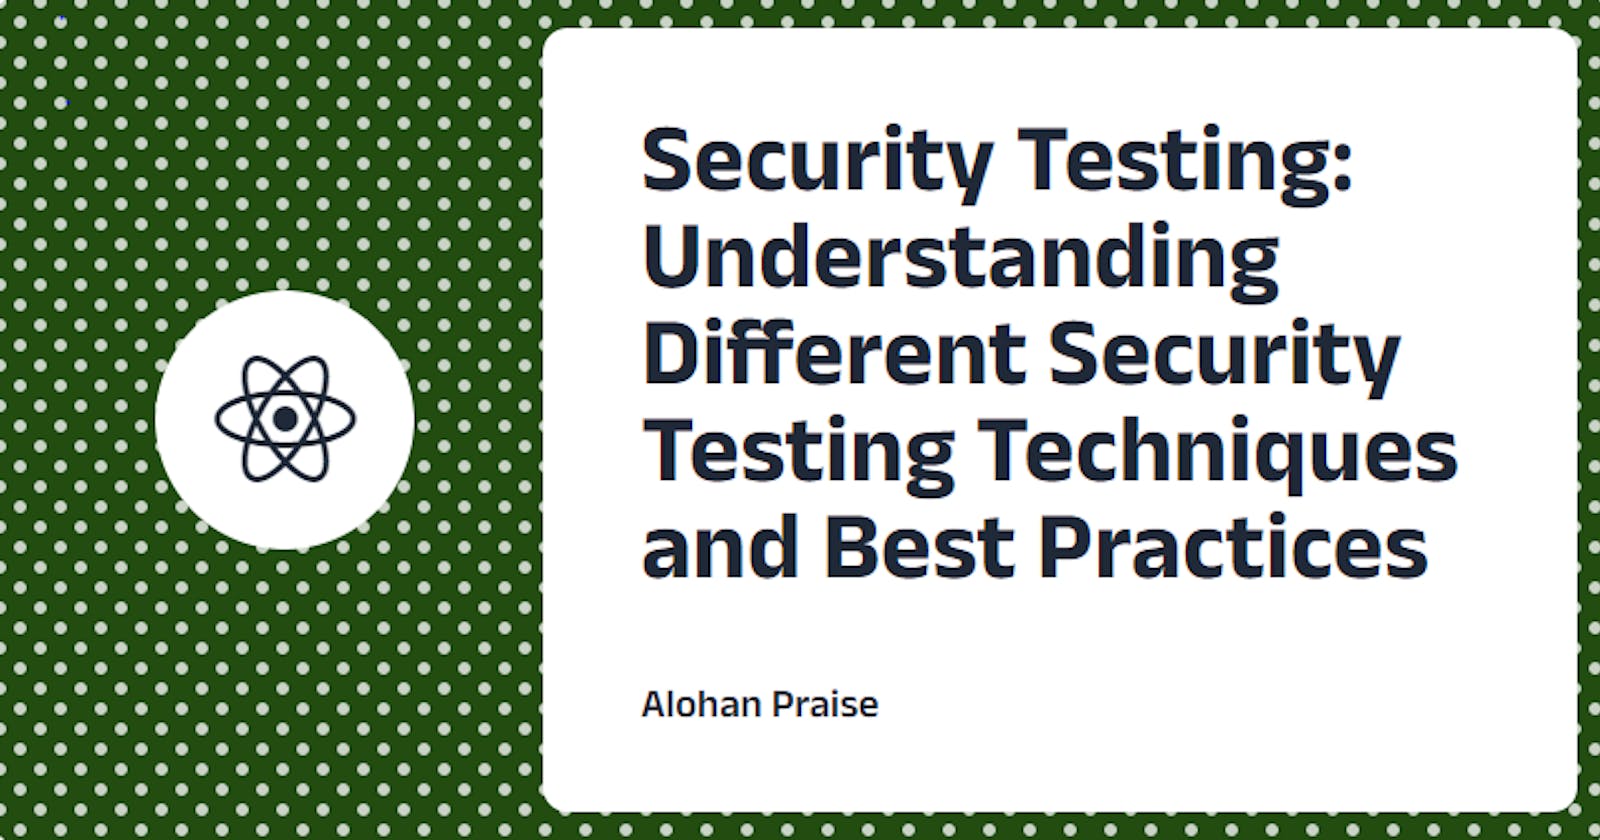 Security Testing: Understanding Different Security Testing Techniques and Best Practices